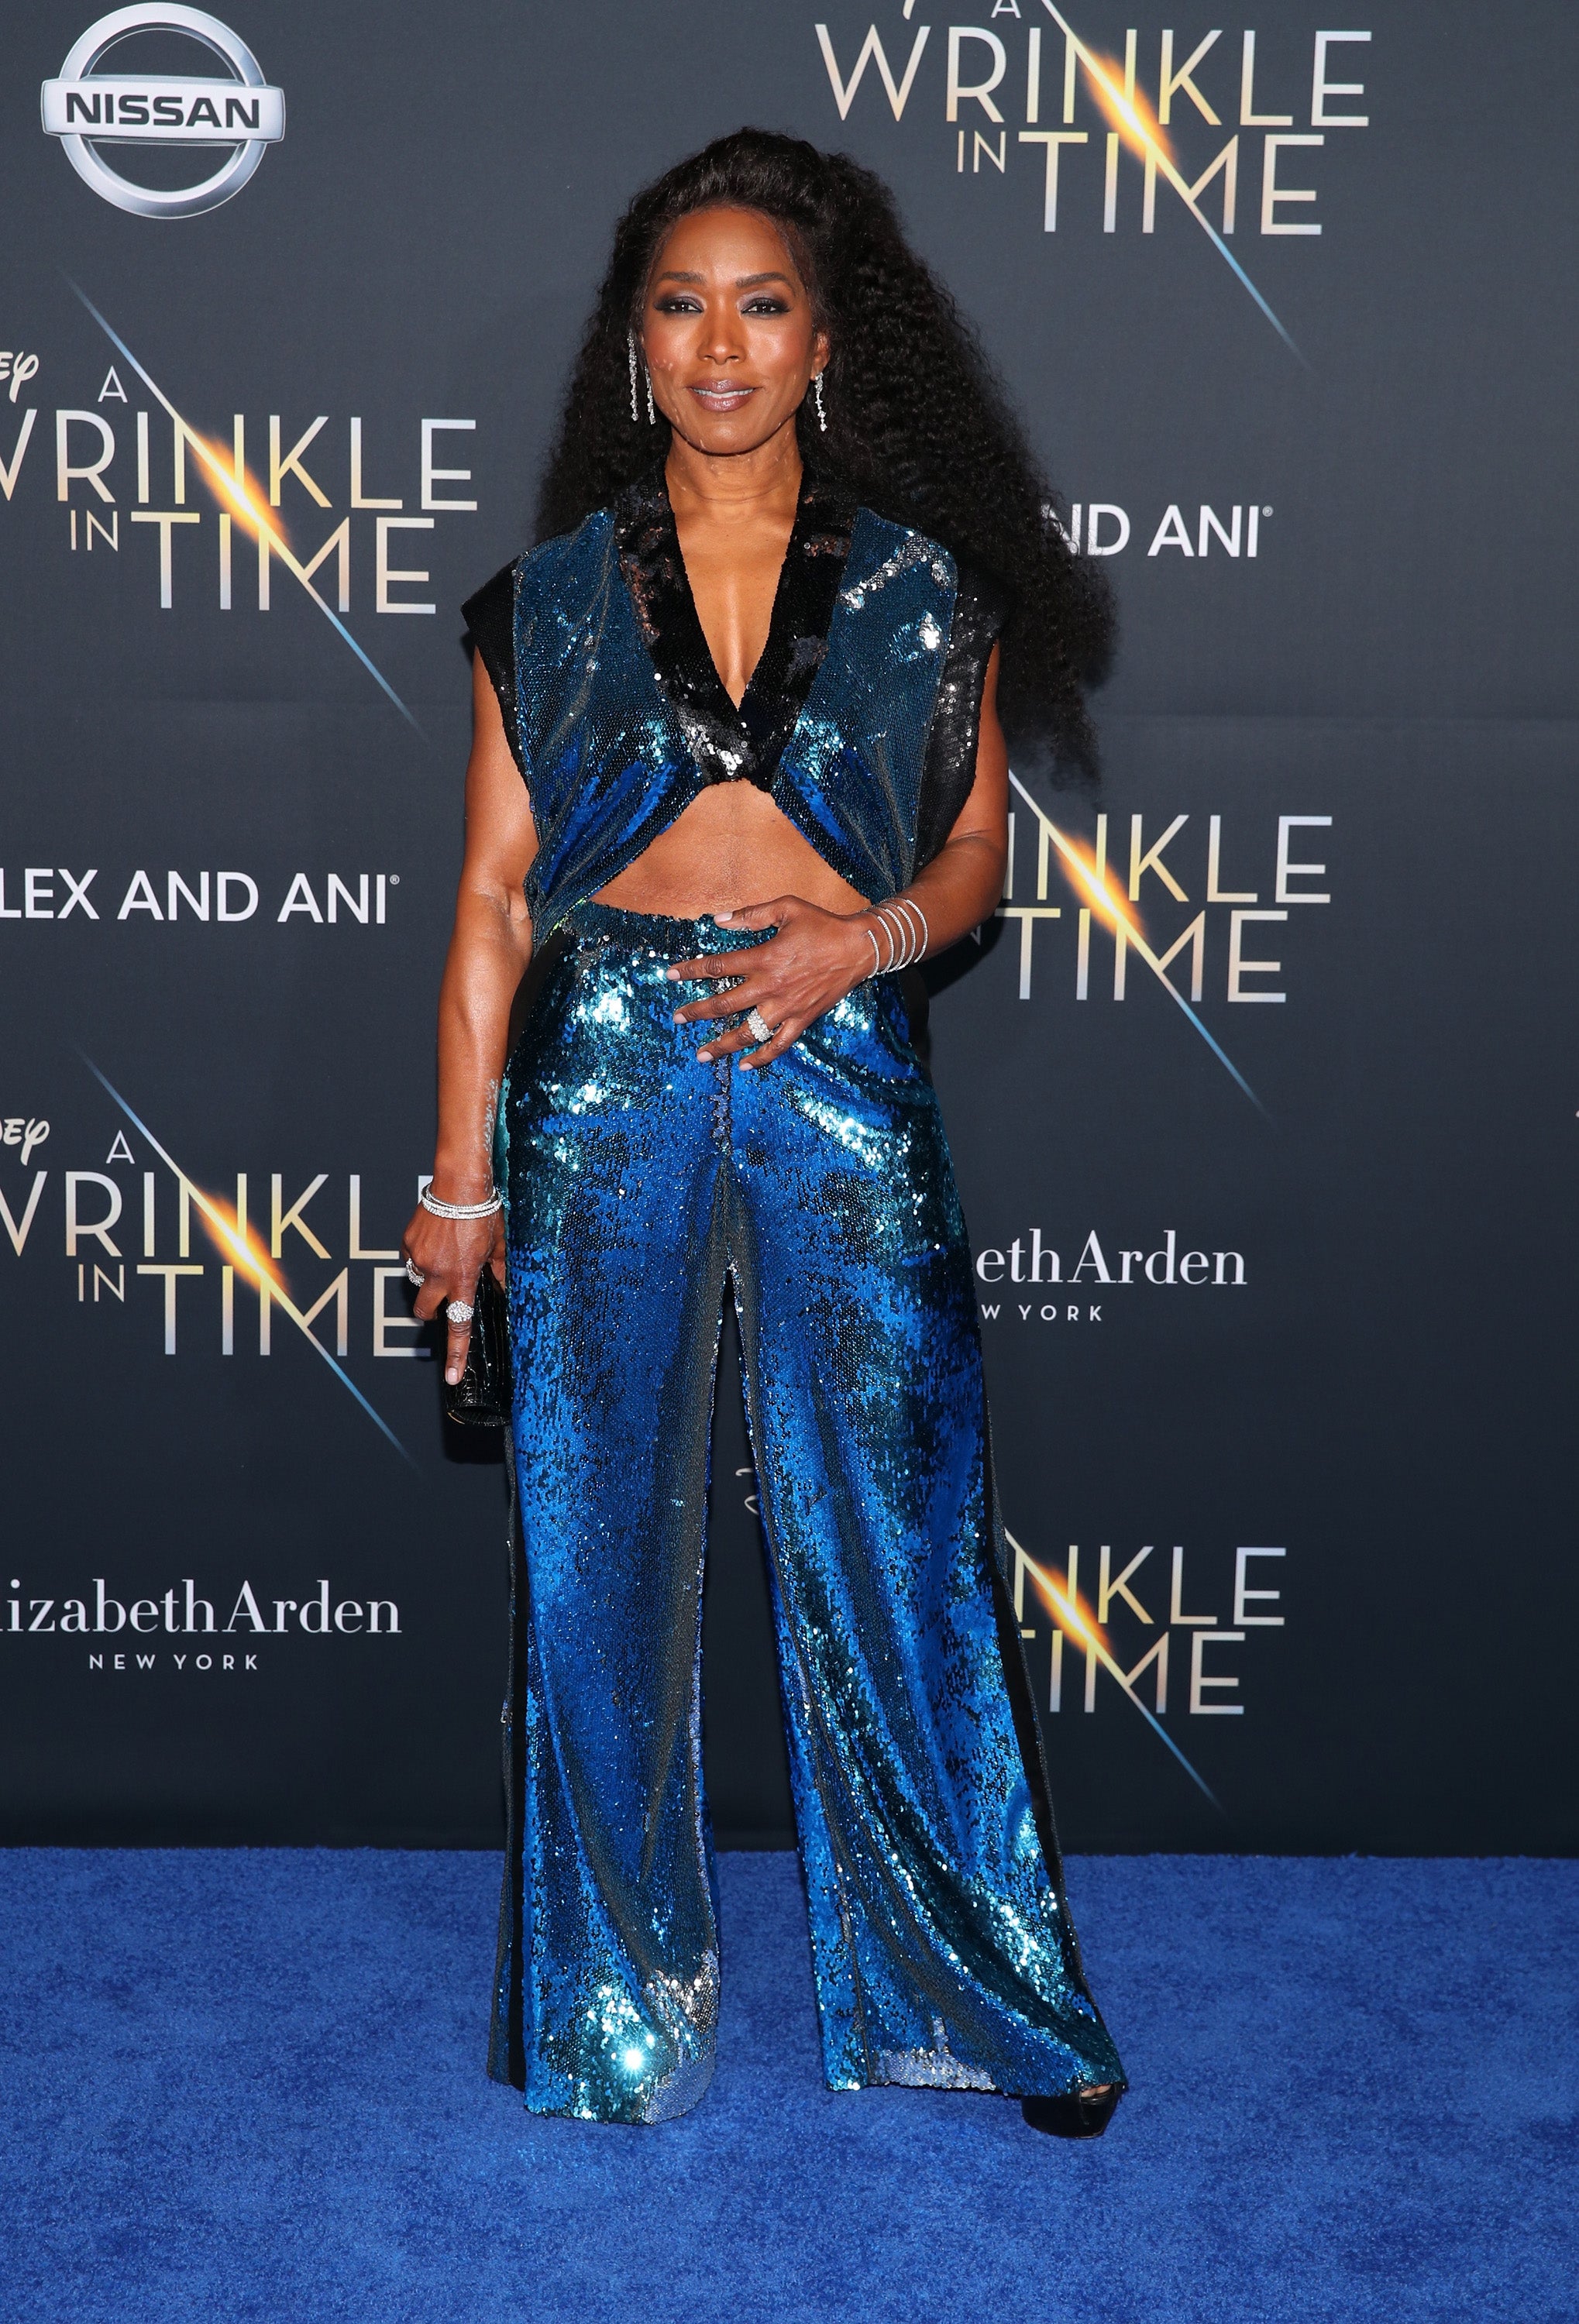 All The Stars Shined At The 'A Wrinkle In Time' Los Angeles Premiere 
